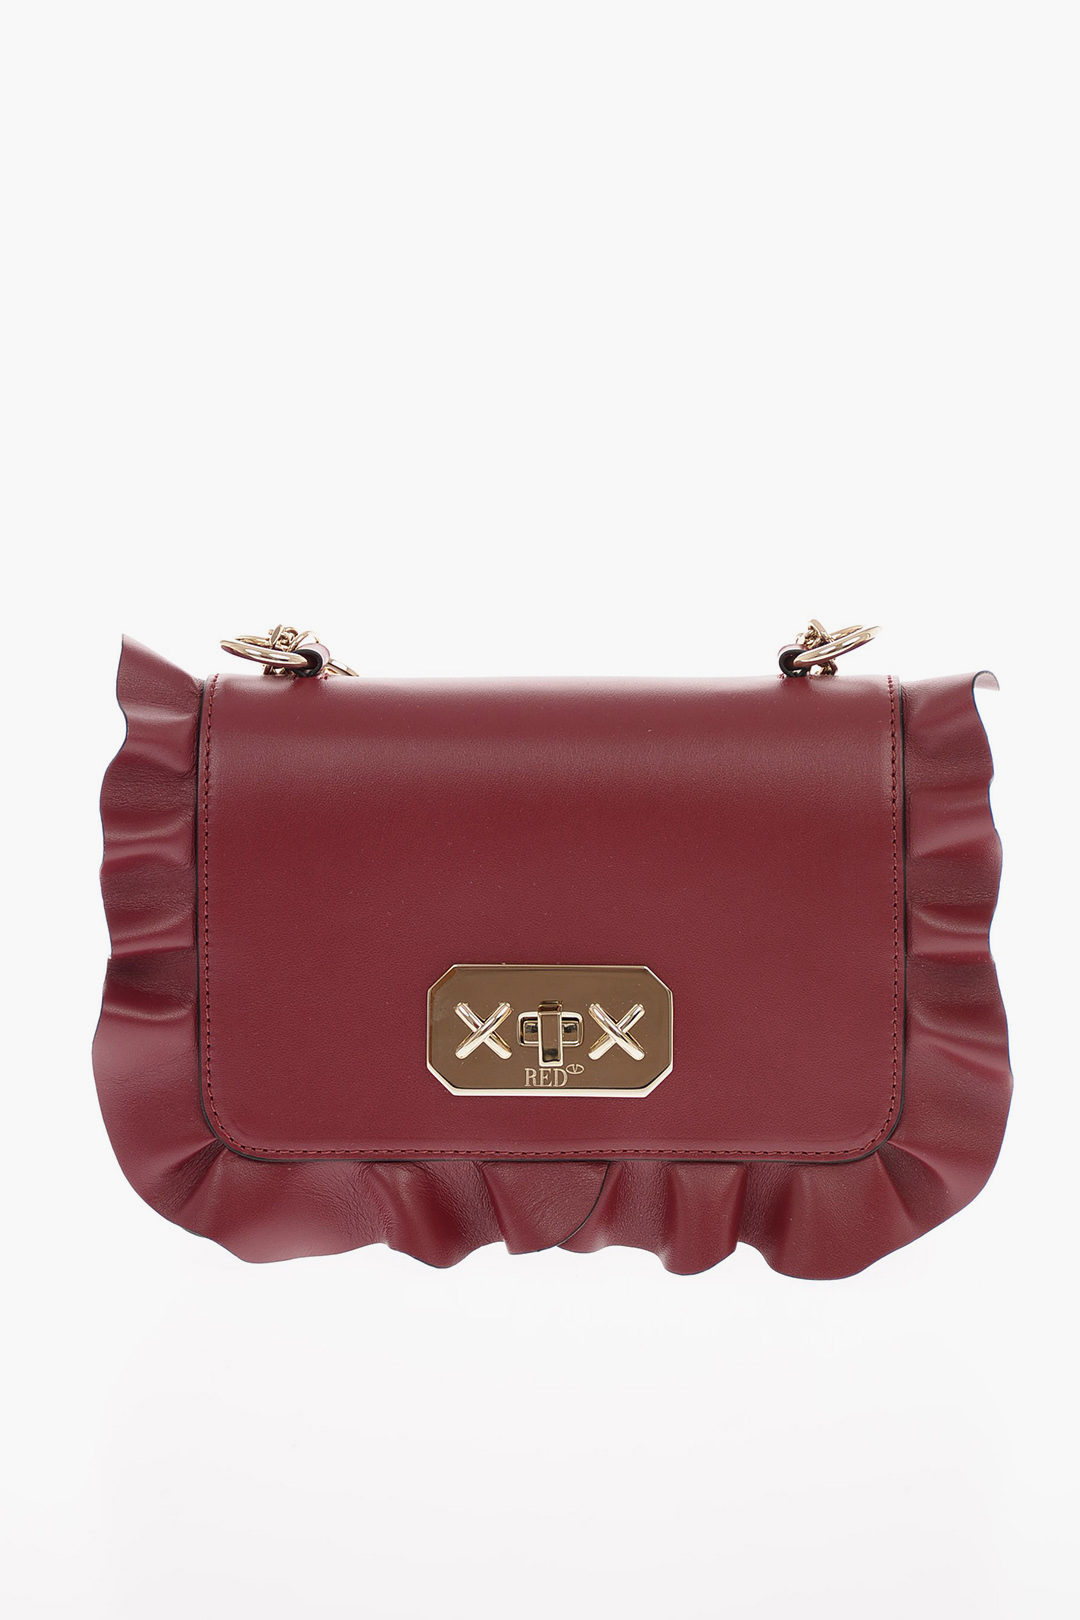 RED Valentino Rock Ruffles Red Leather Crossbody/Belt Bag at FORZIERI